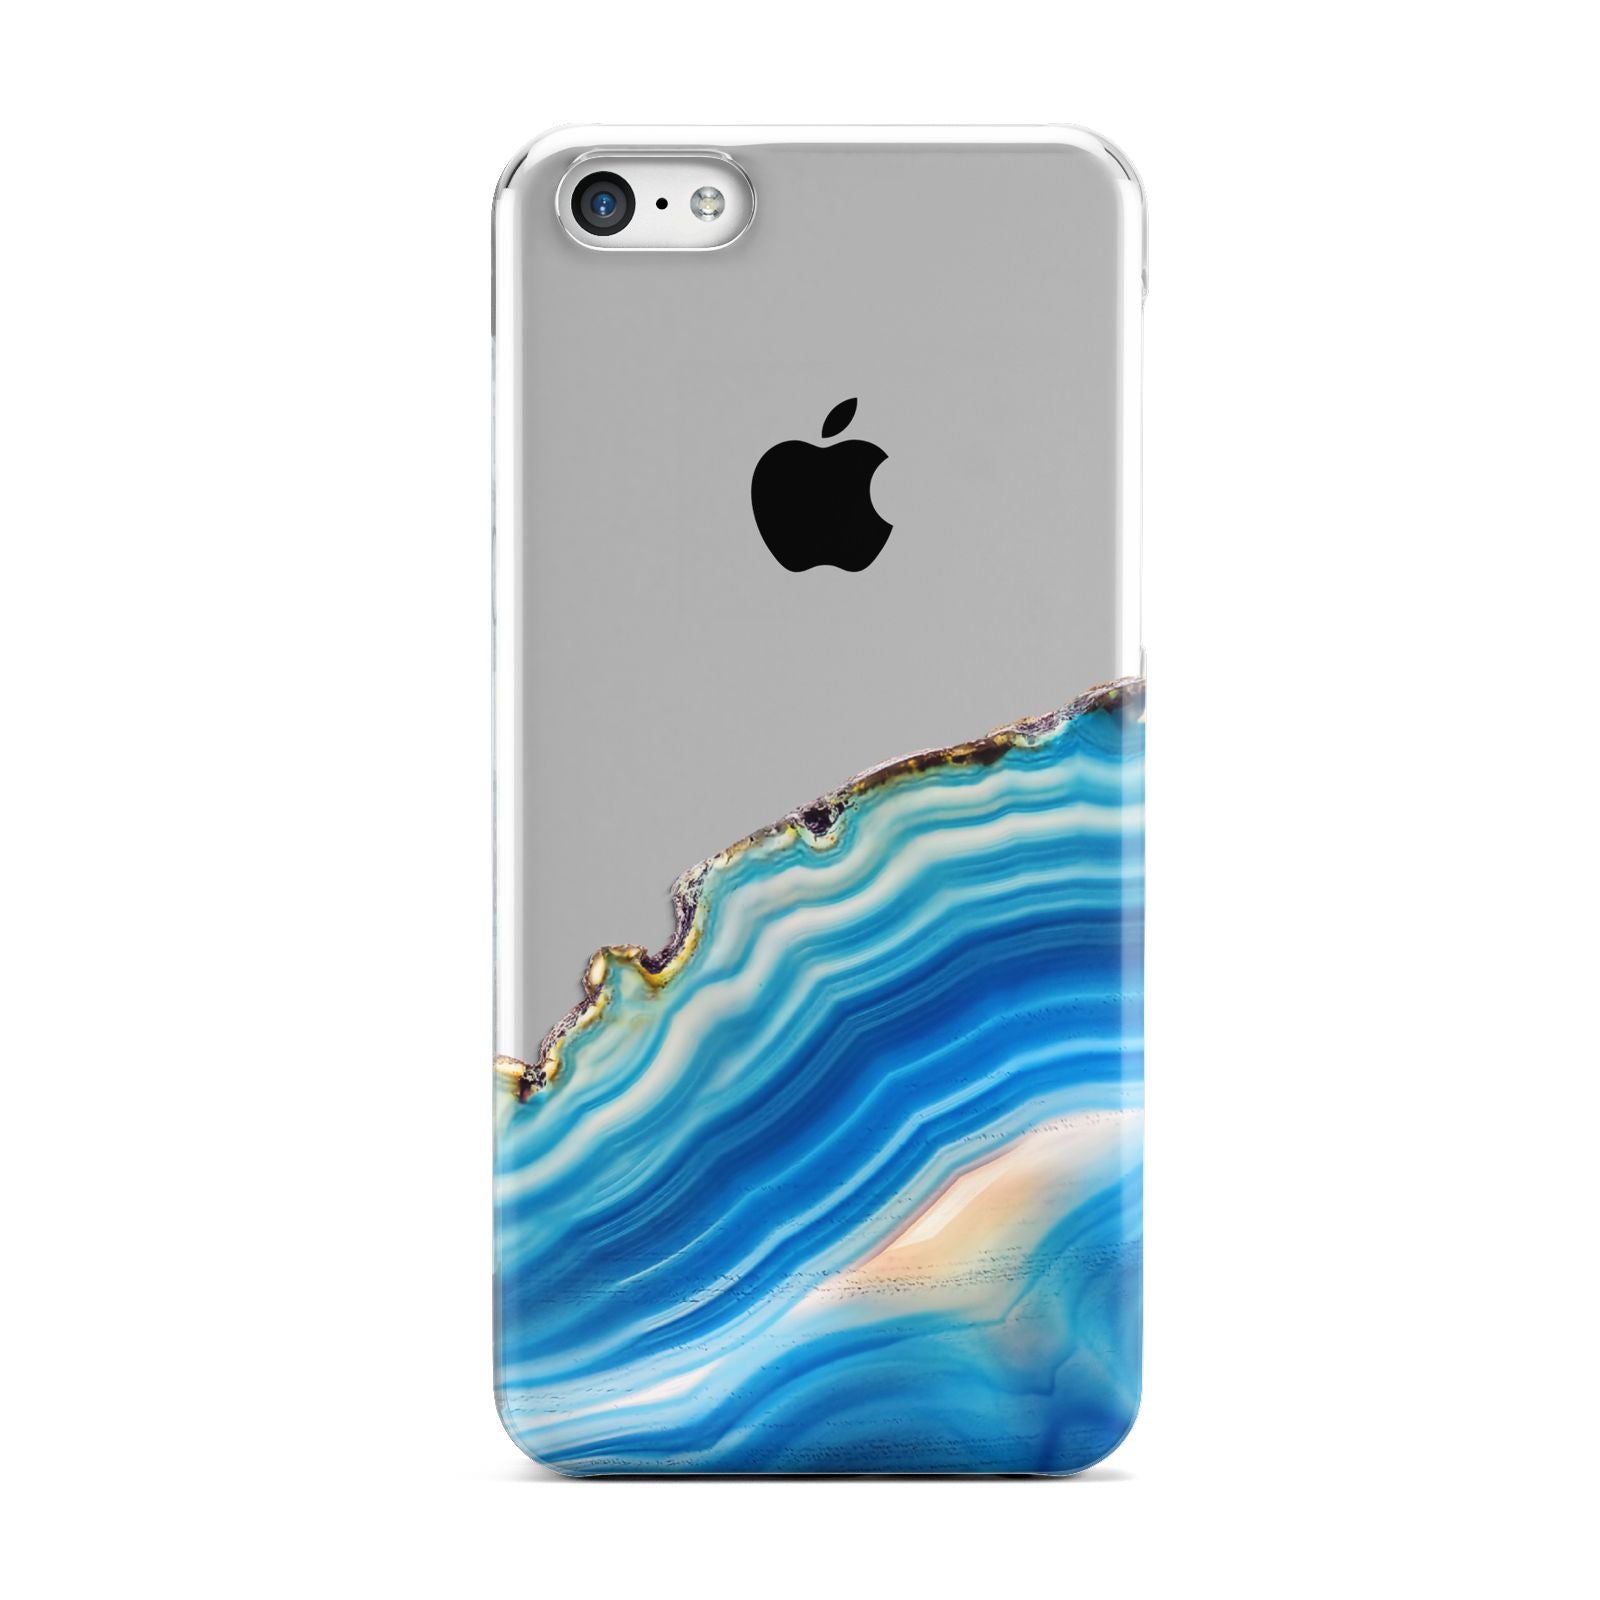 Agate Pale Blue and Bright Blue Apple iPhone 5c Case